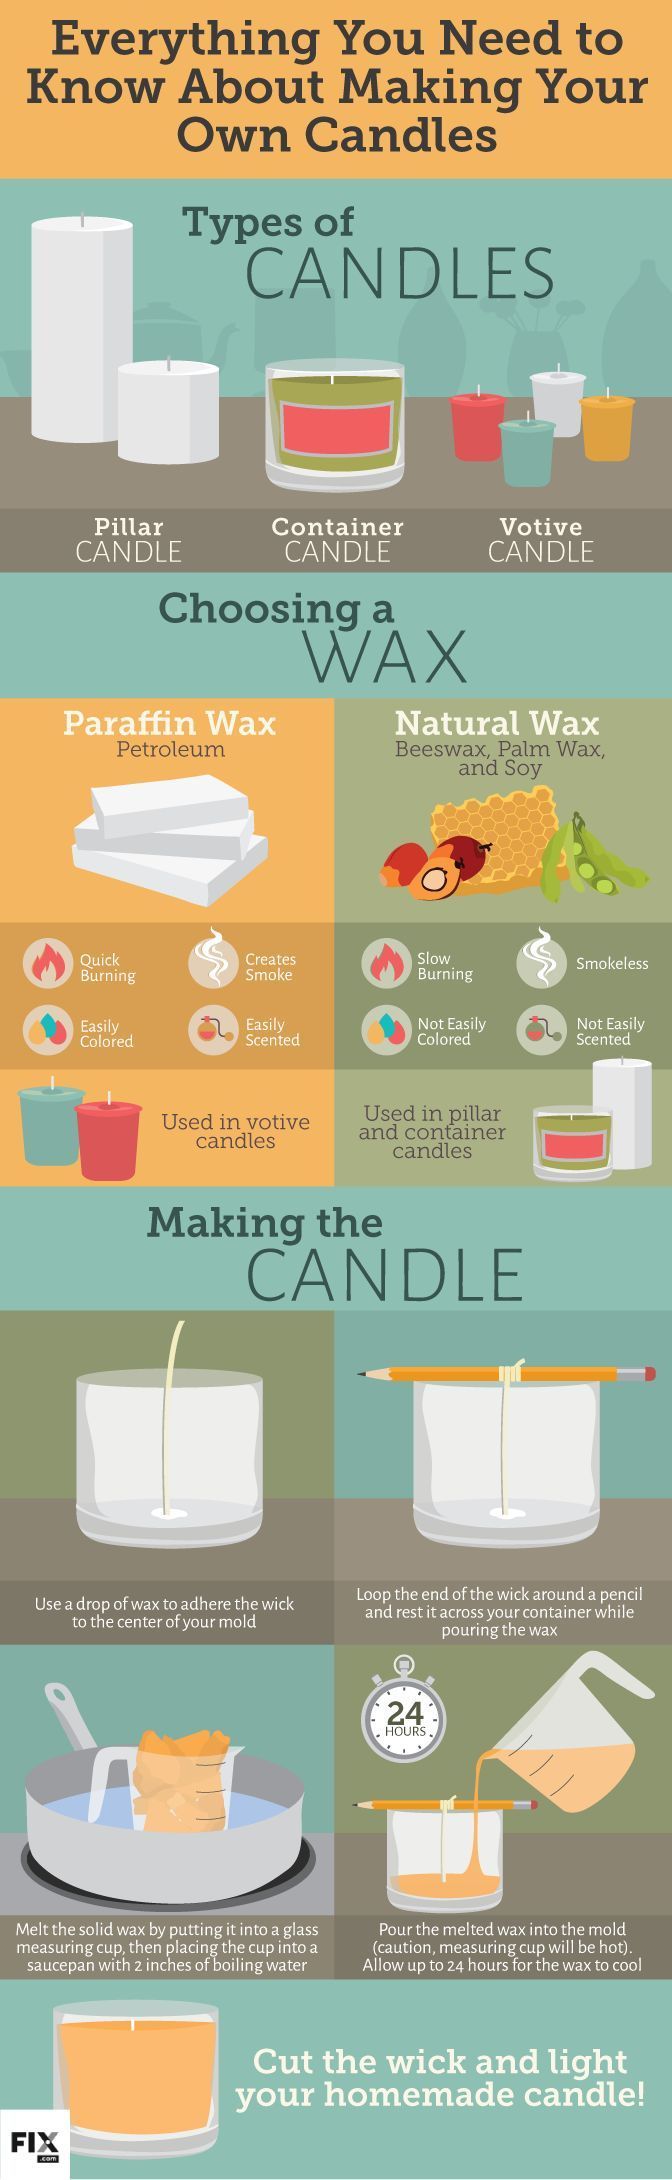 How to Make a Homemade Candles [Infographic] |  Create your Own Relaxing Aromas wi